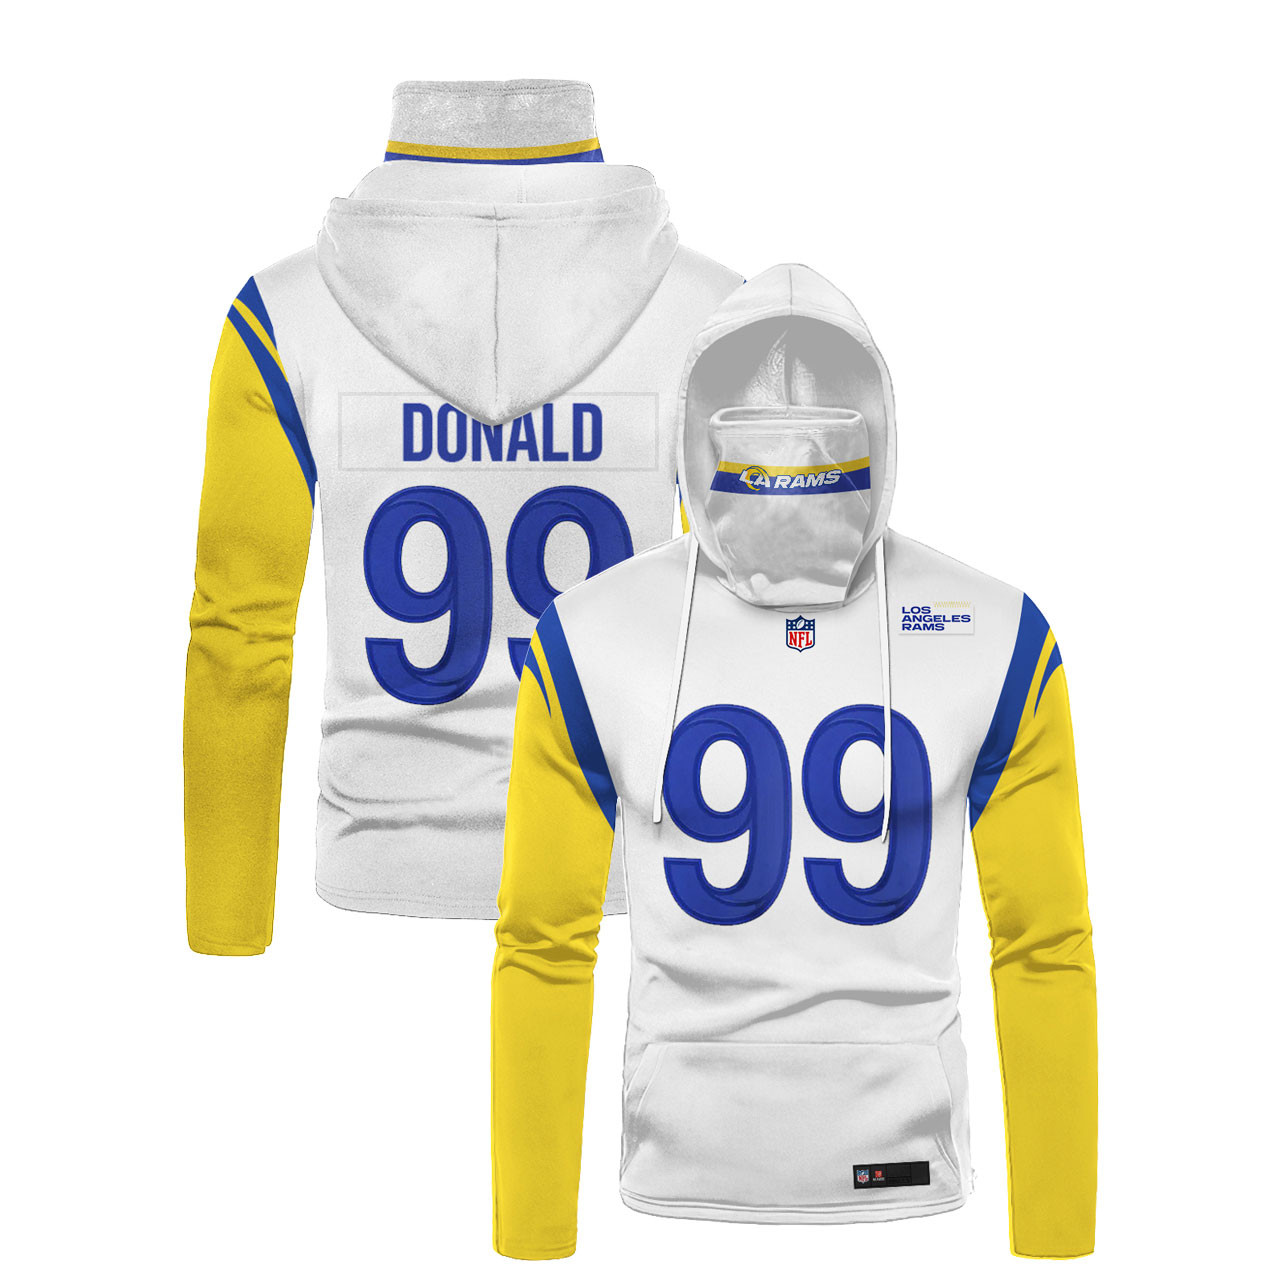 Los Angeles Rams Nfl Personalized Number Name Blue And Golden Style Gift For Football And Seahawks Fans Hoodie